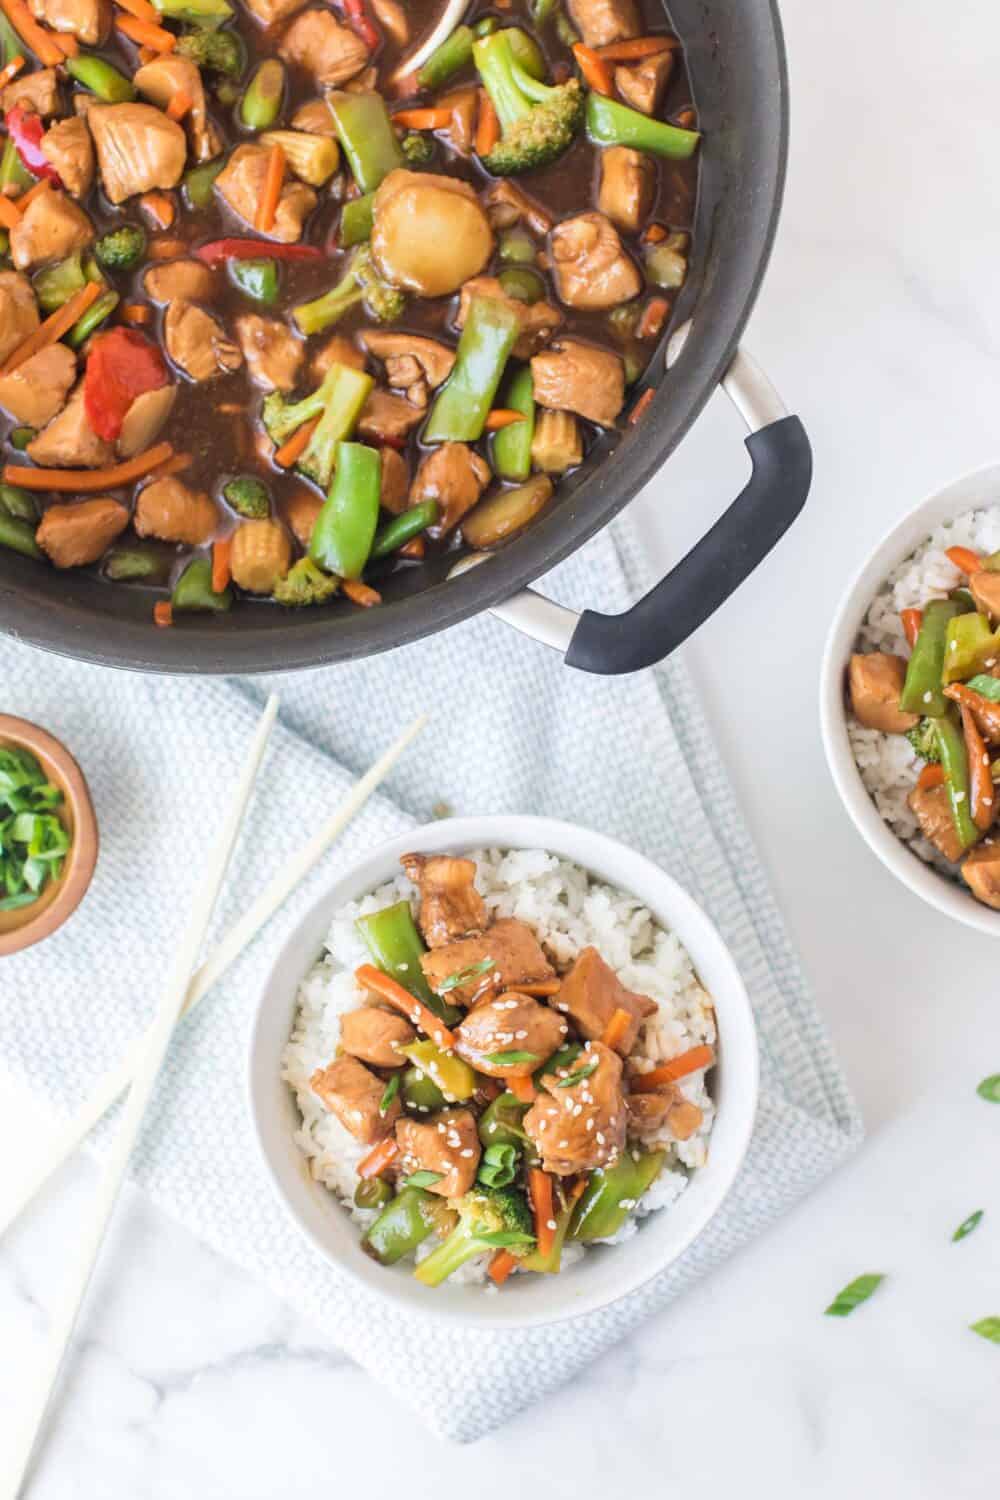 stir fried sticky saucy chicken and veggies in a pan and then the served on the side over rice in a white bowl.